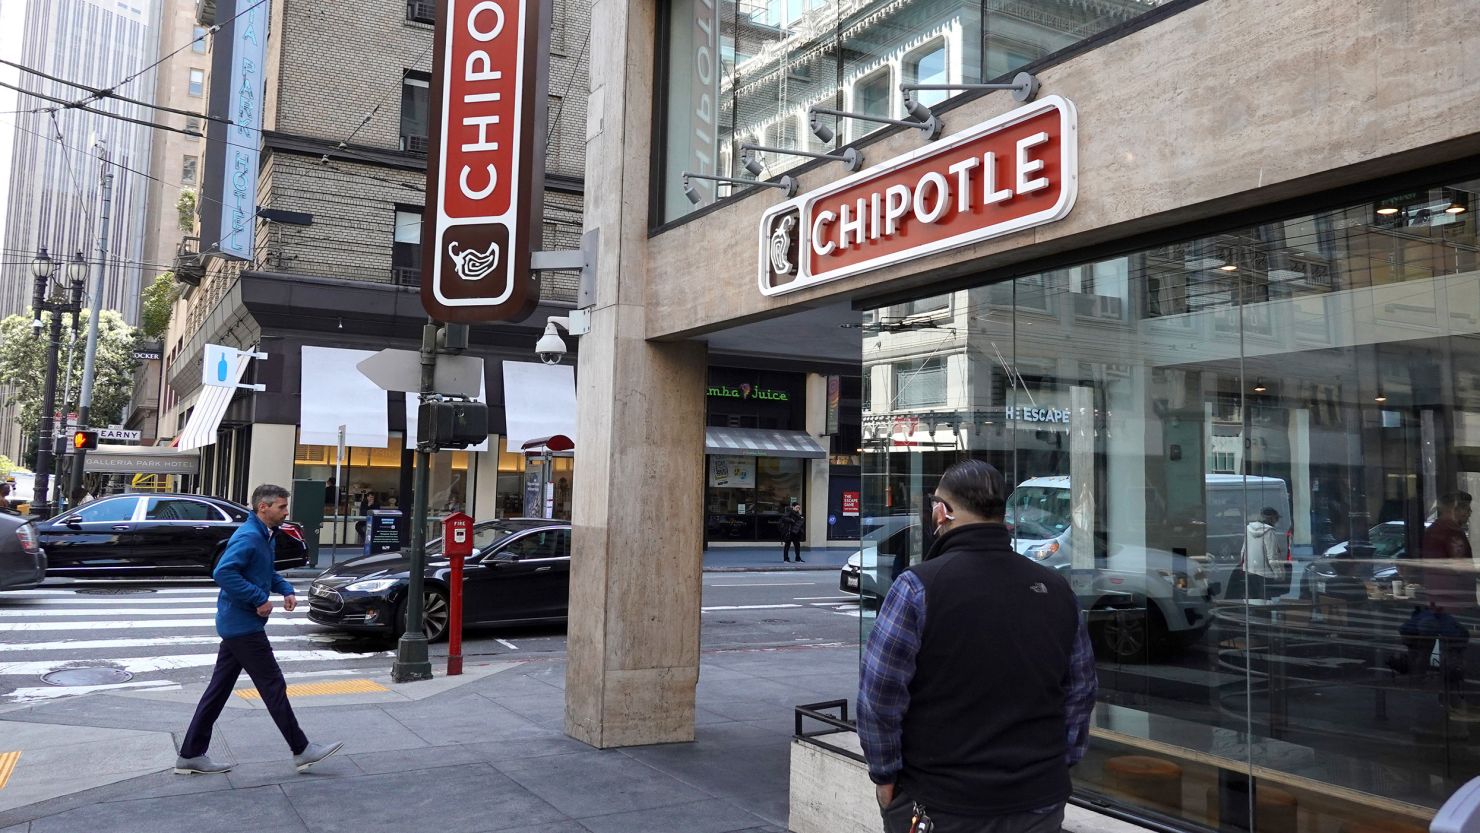 SAN FRANCISCO, CALIFORNIA - APRIL 26: Pedestrians walk by a Chipotle restaurant on April 26, 2022 in San Francisco, California. Chipotle Mexican Grill will report its first quarter earnings today after the closing bell. (Photo by Justin Sullivan/Getty Images)